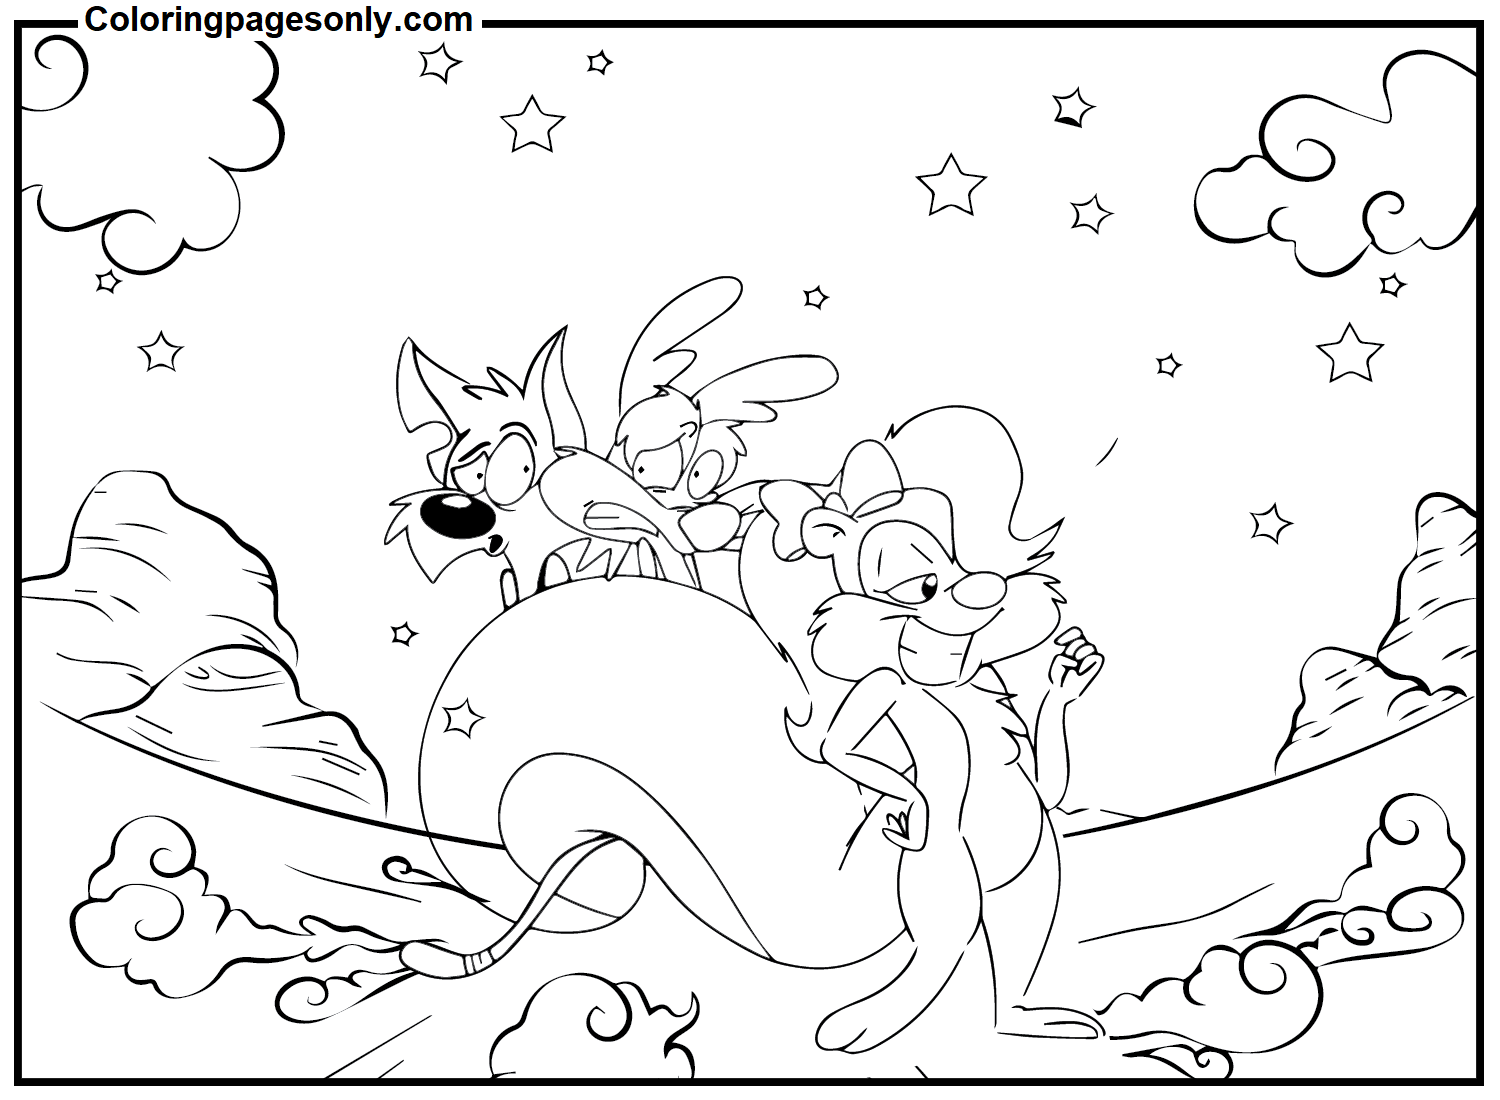 Fifi La Fume With Friends Coloring Pages